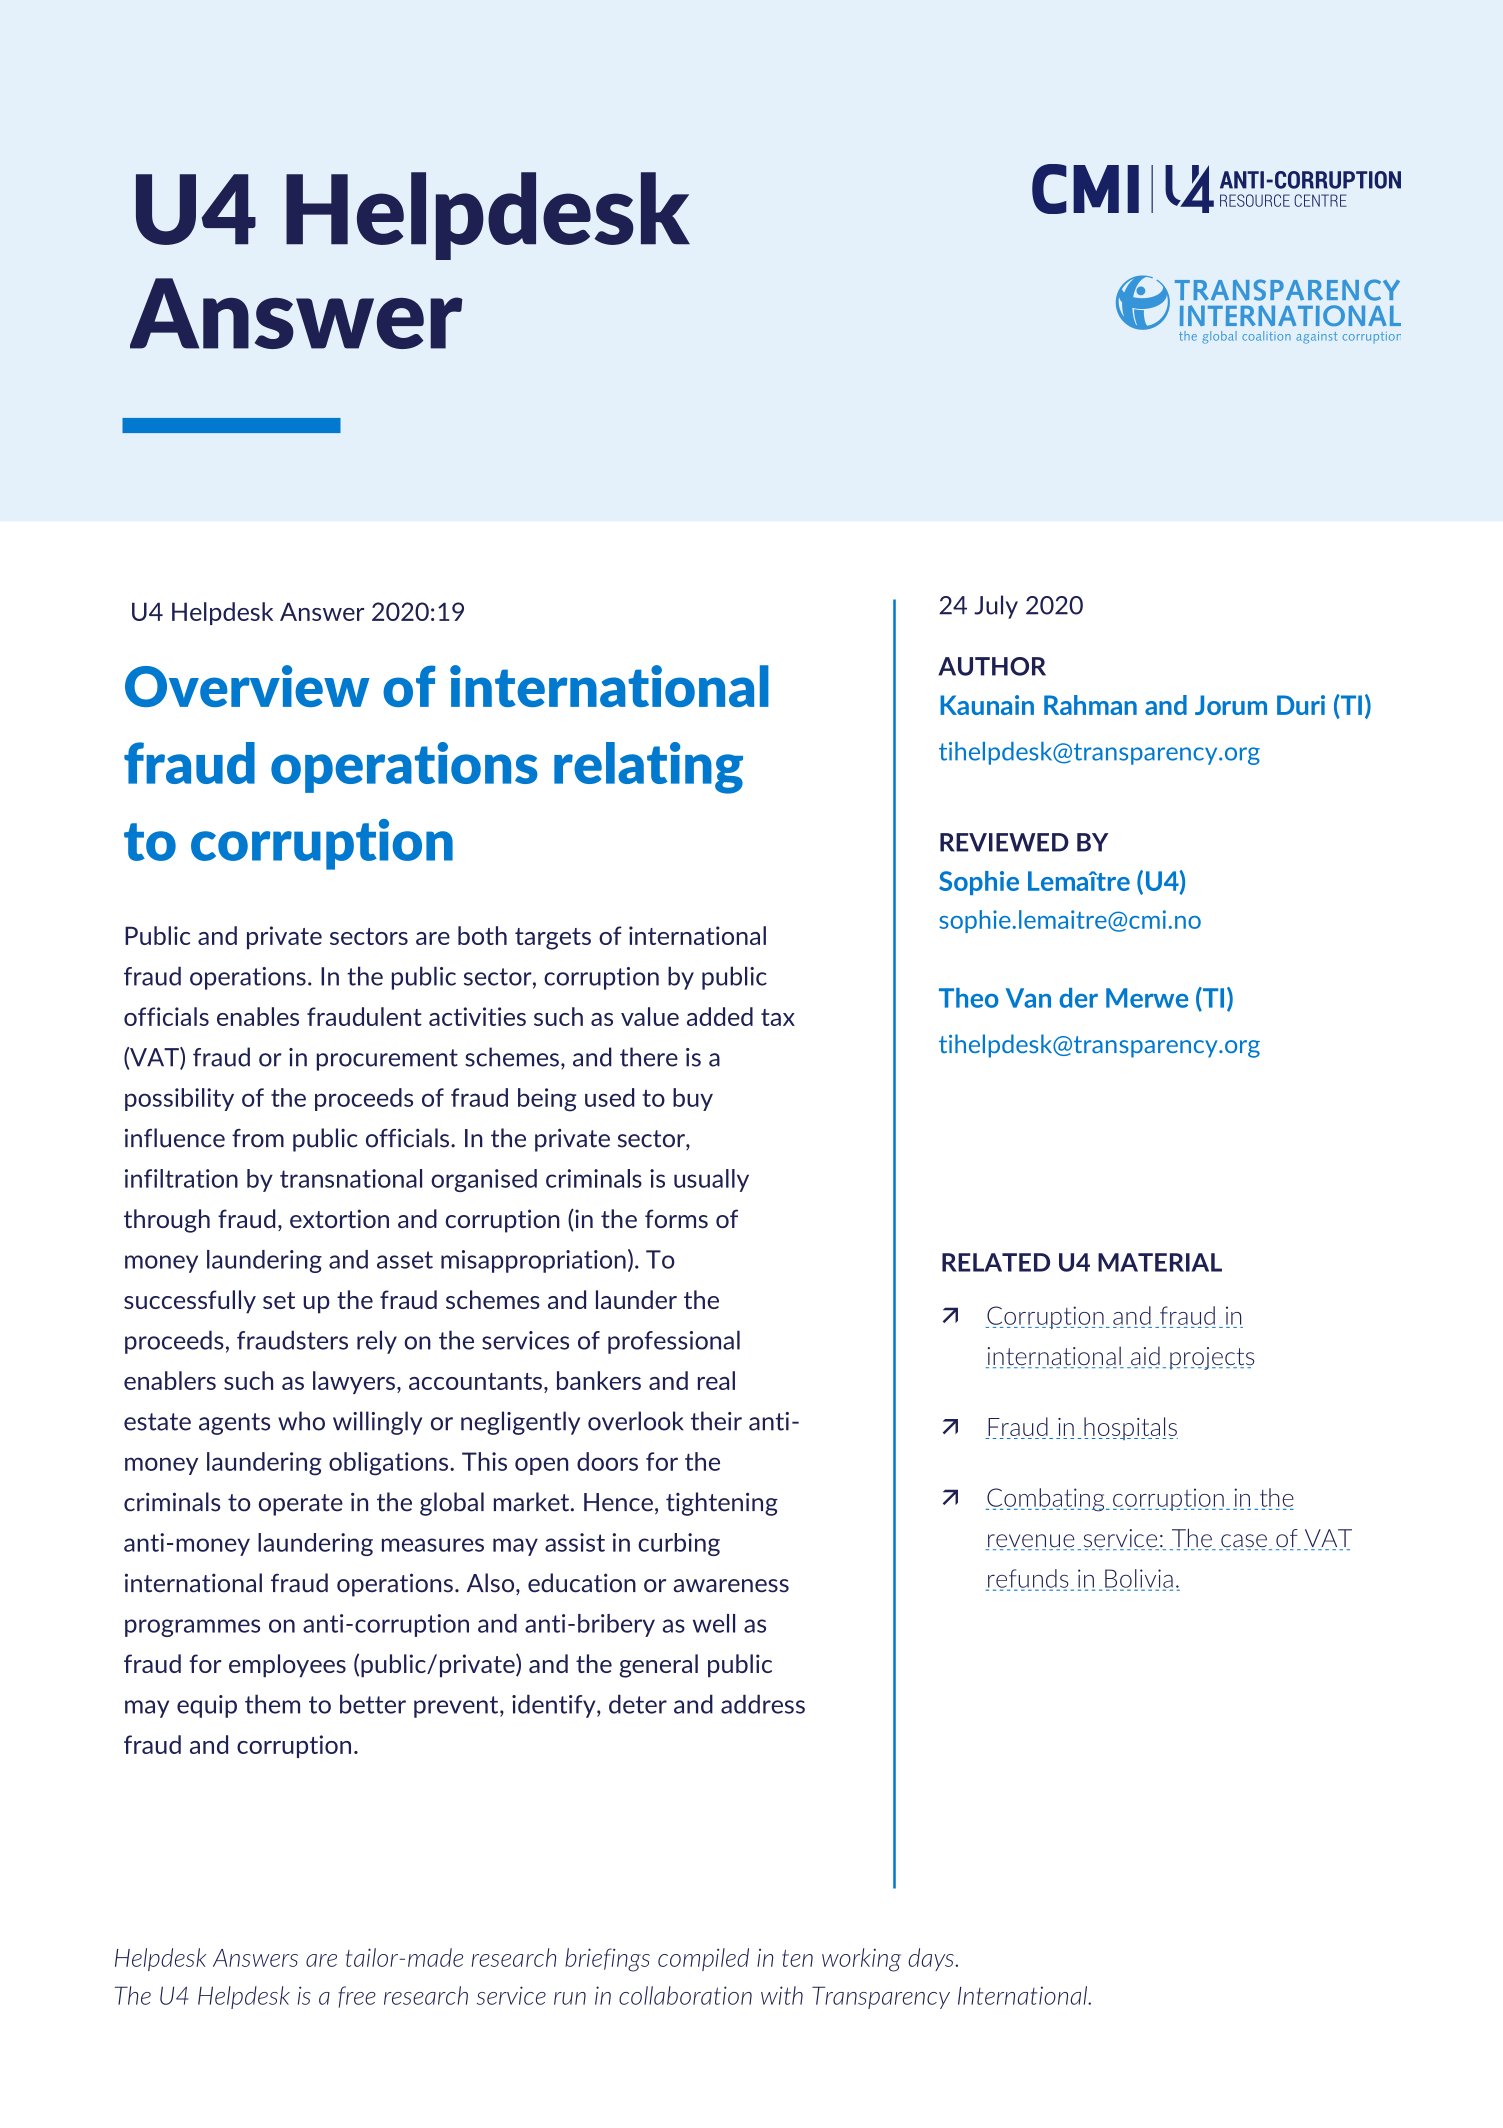 Overview of international fraud operations relating to corruption